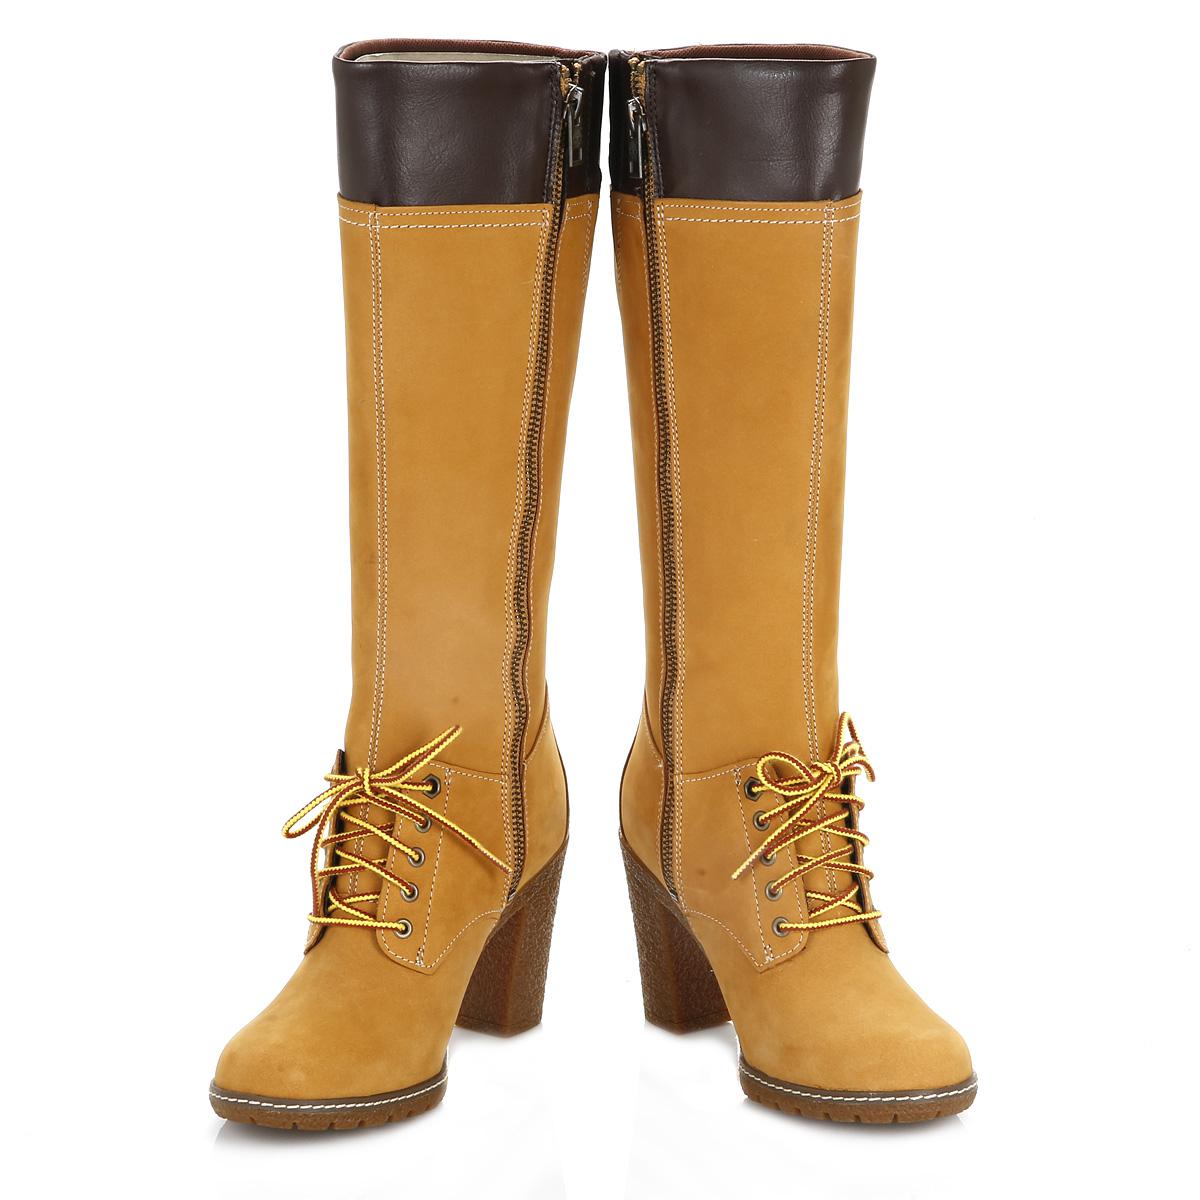 timberland 14 inch boots wheat